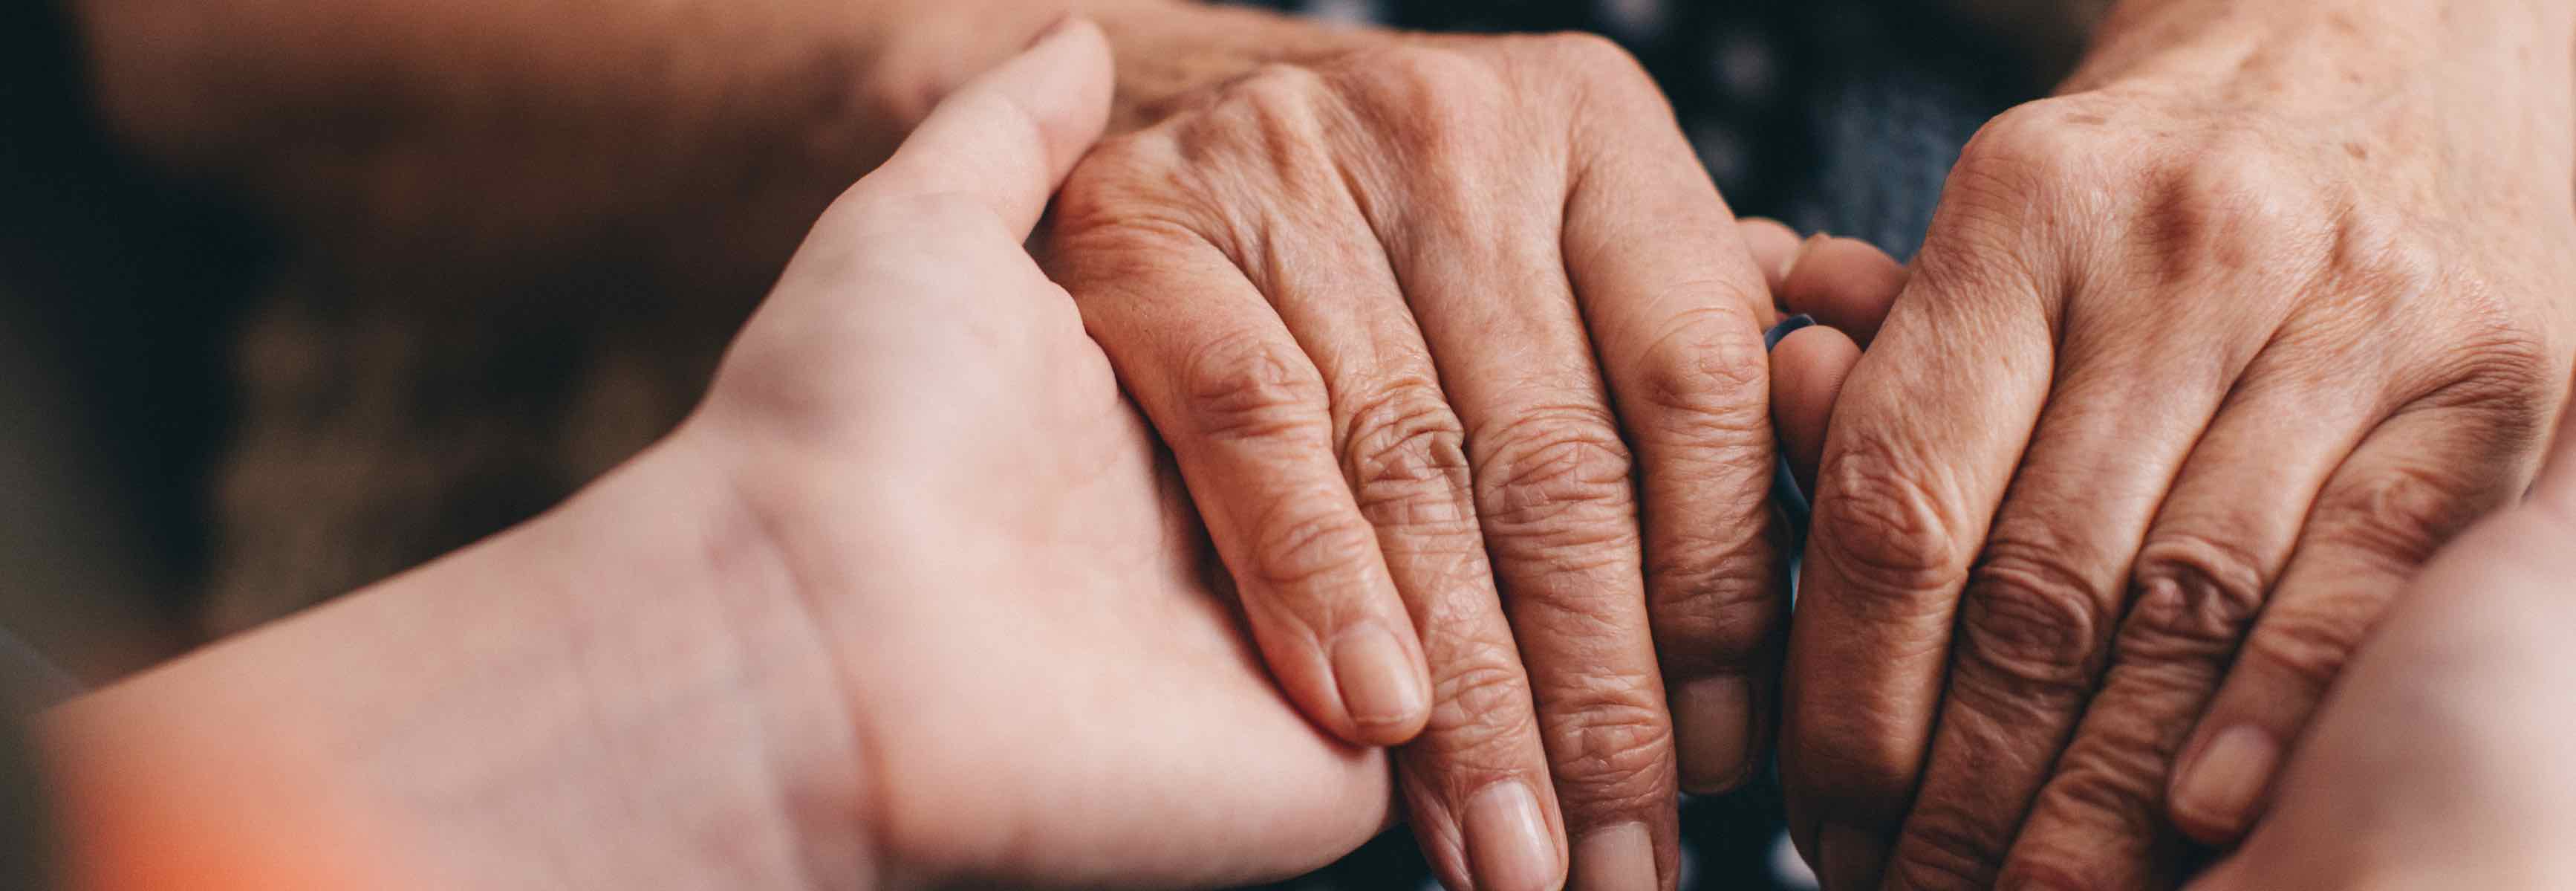 Two assisted living residents holding hands.